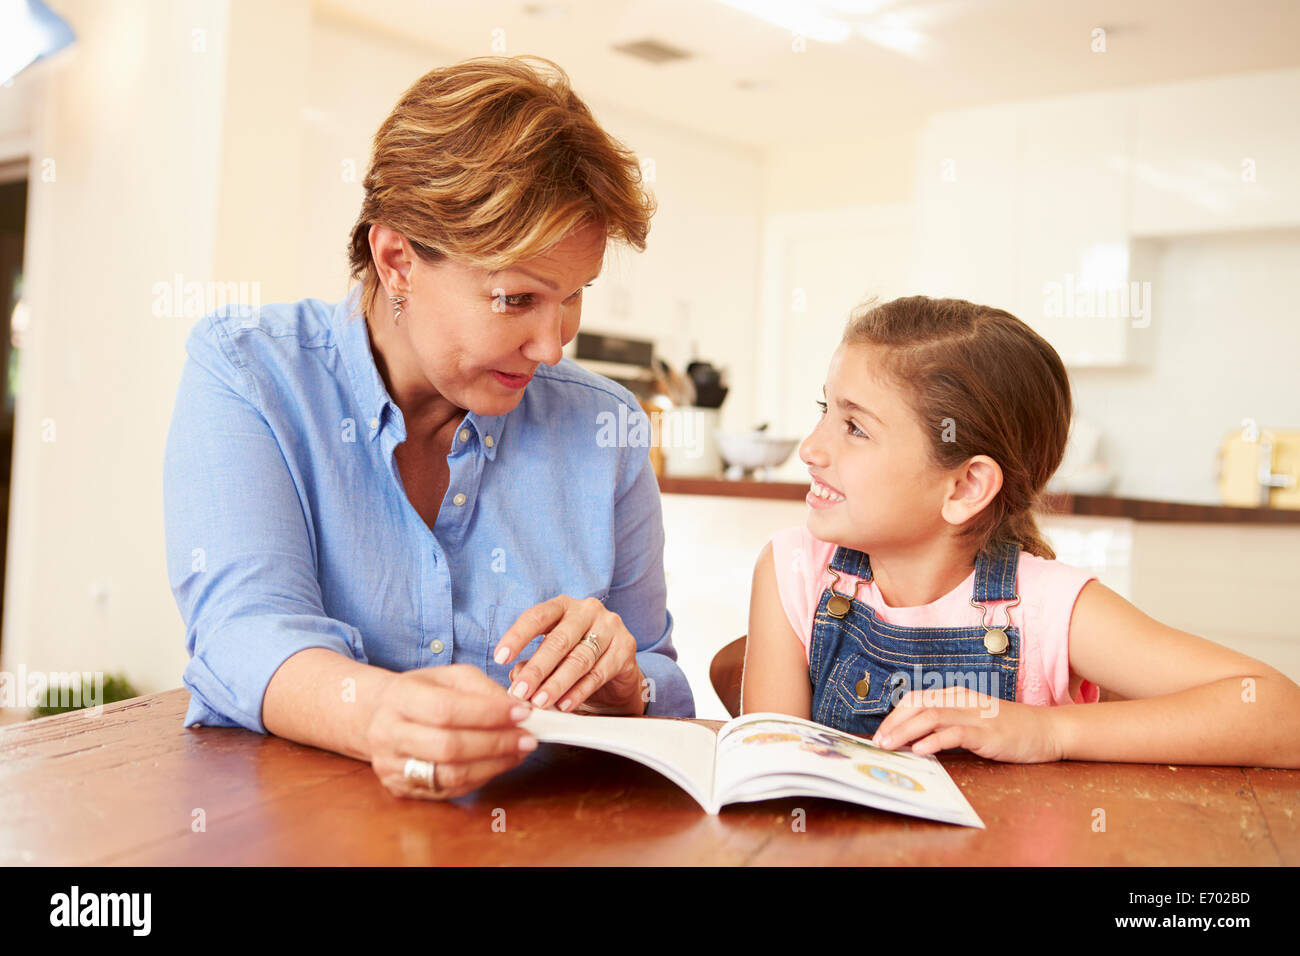 Grandmother Reading With Granddaughter At Home Stock Photo